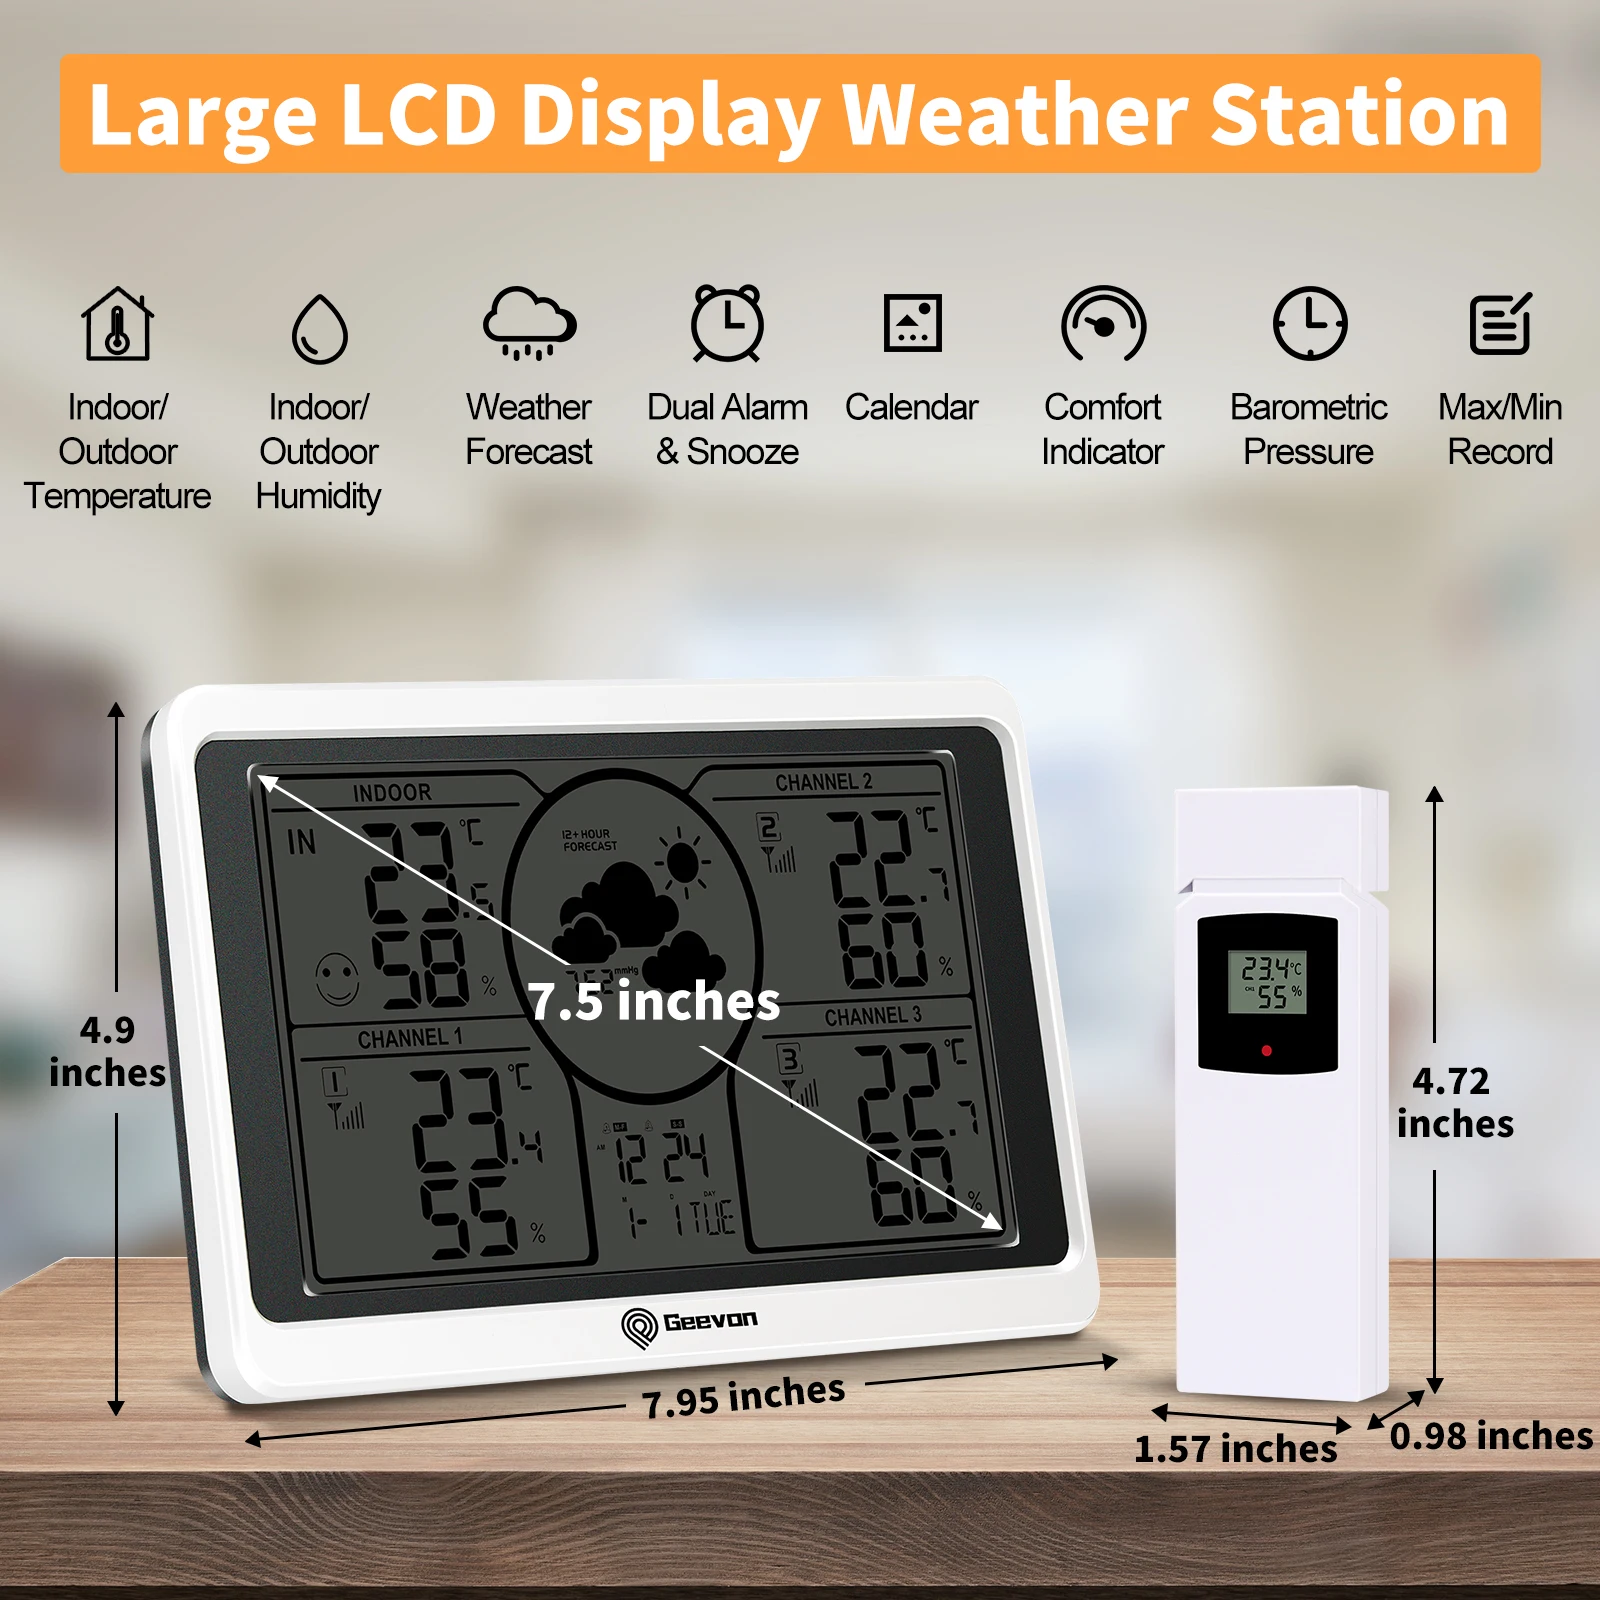 https://ae01.alicdn.com/kf/S64532dc0dddb4299a941605933a3f402O/Geevon-Weather-Station-Wireless-Indoor-Outdoor-Thermometer-Color-Display-Weather-With-Barometer-Calendar-Adjustable-Backlight.jpg